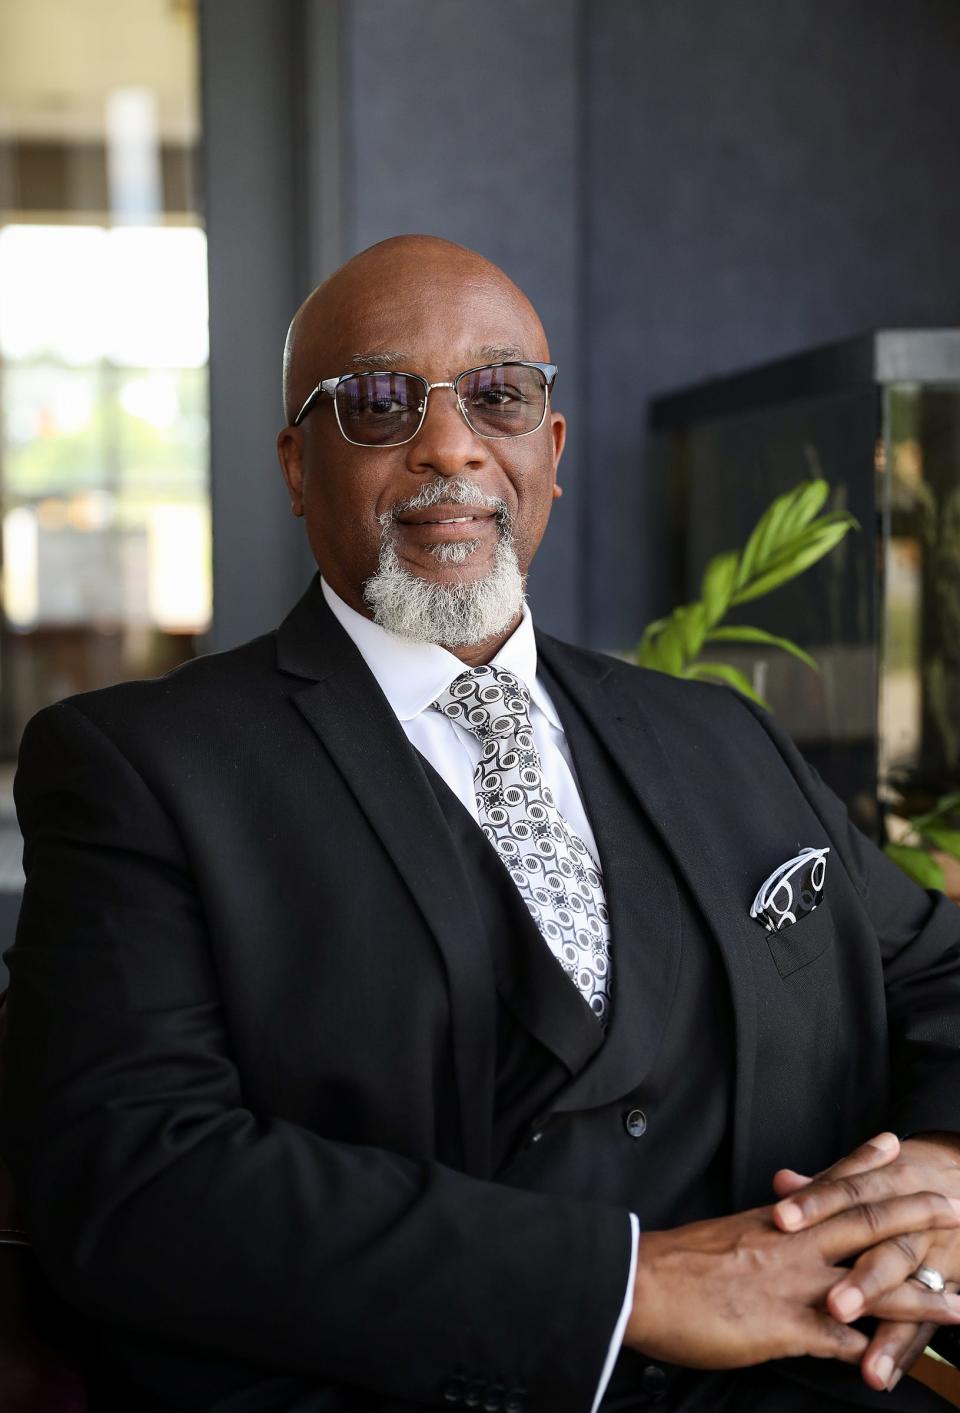 The Rev. David Greene Sr., senior pastor at Purpose of Life Ministries, poses for a portrait at the church in Indianapolis on Tuesday, June 16, 2020.